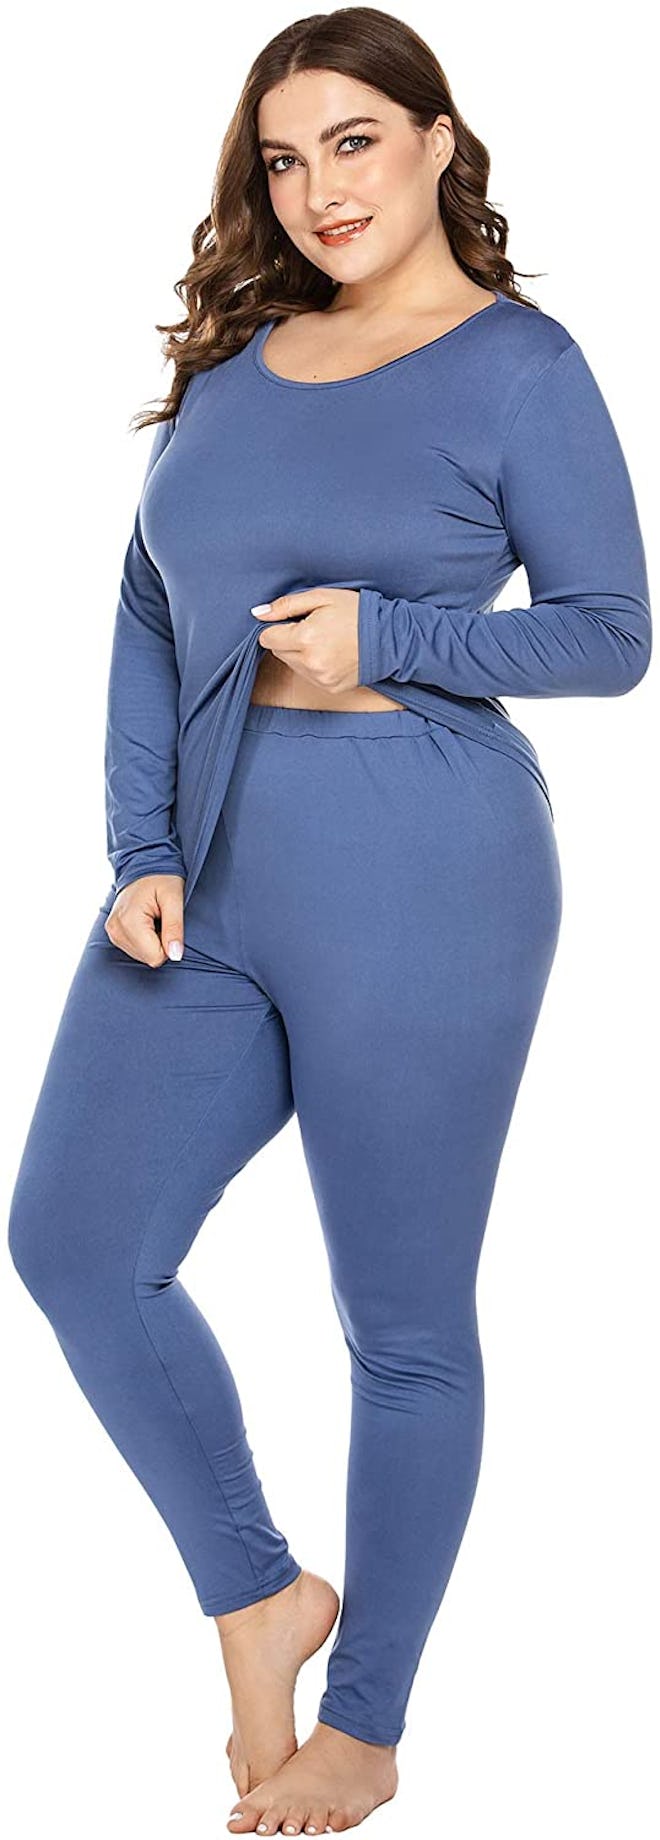 IN'VOLAND Women’s Plus-Size Thermal Long Johns